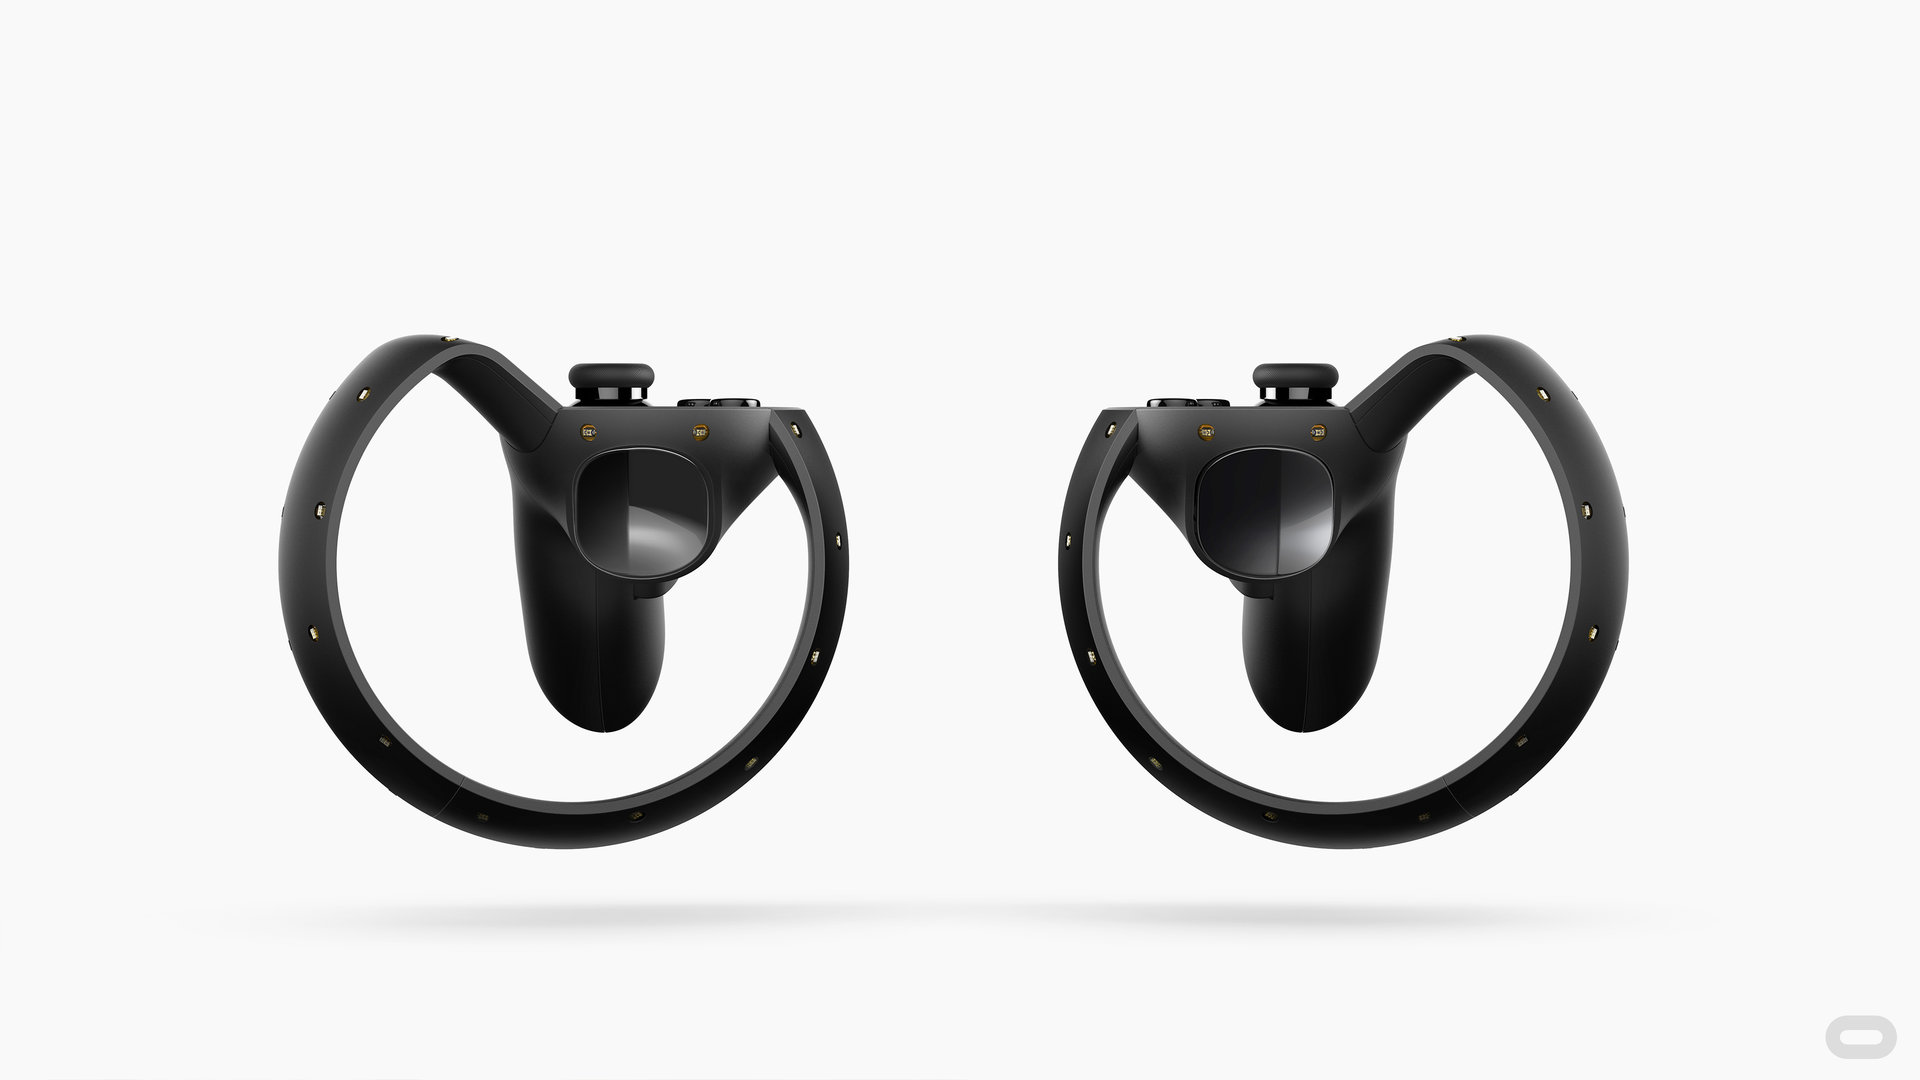 Oculus Touch Controller